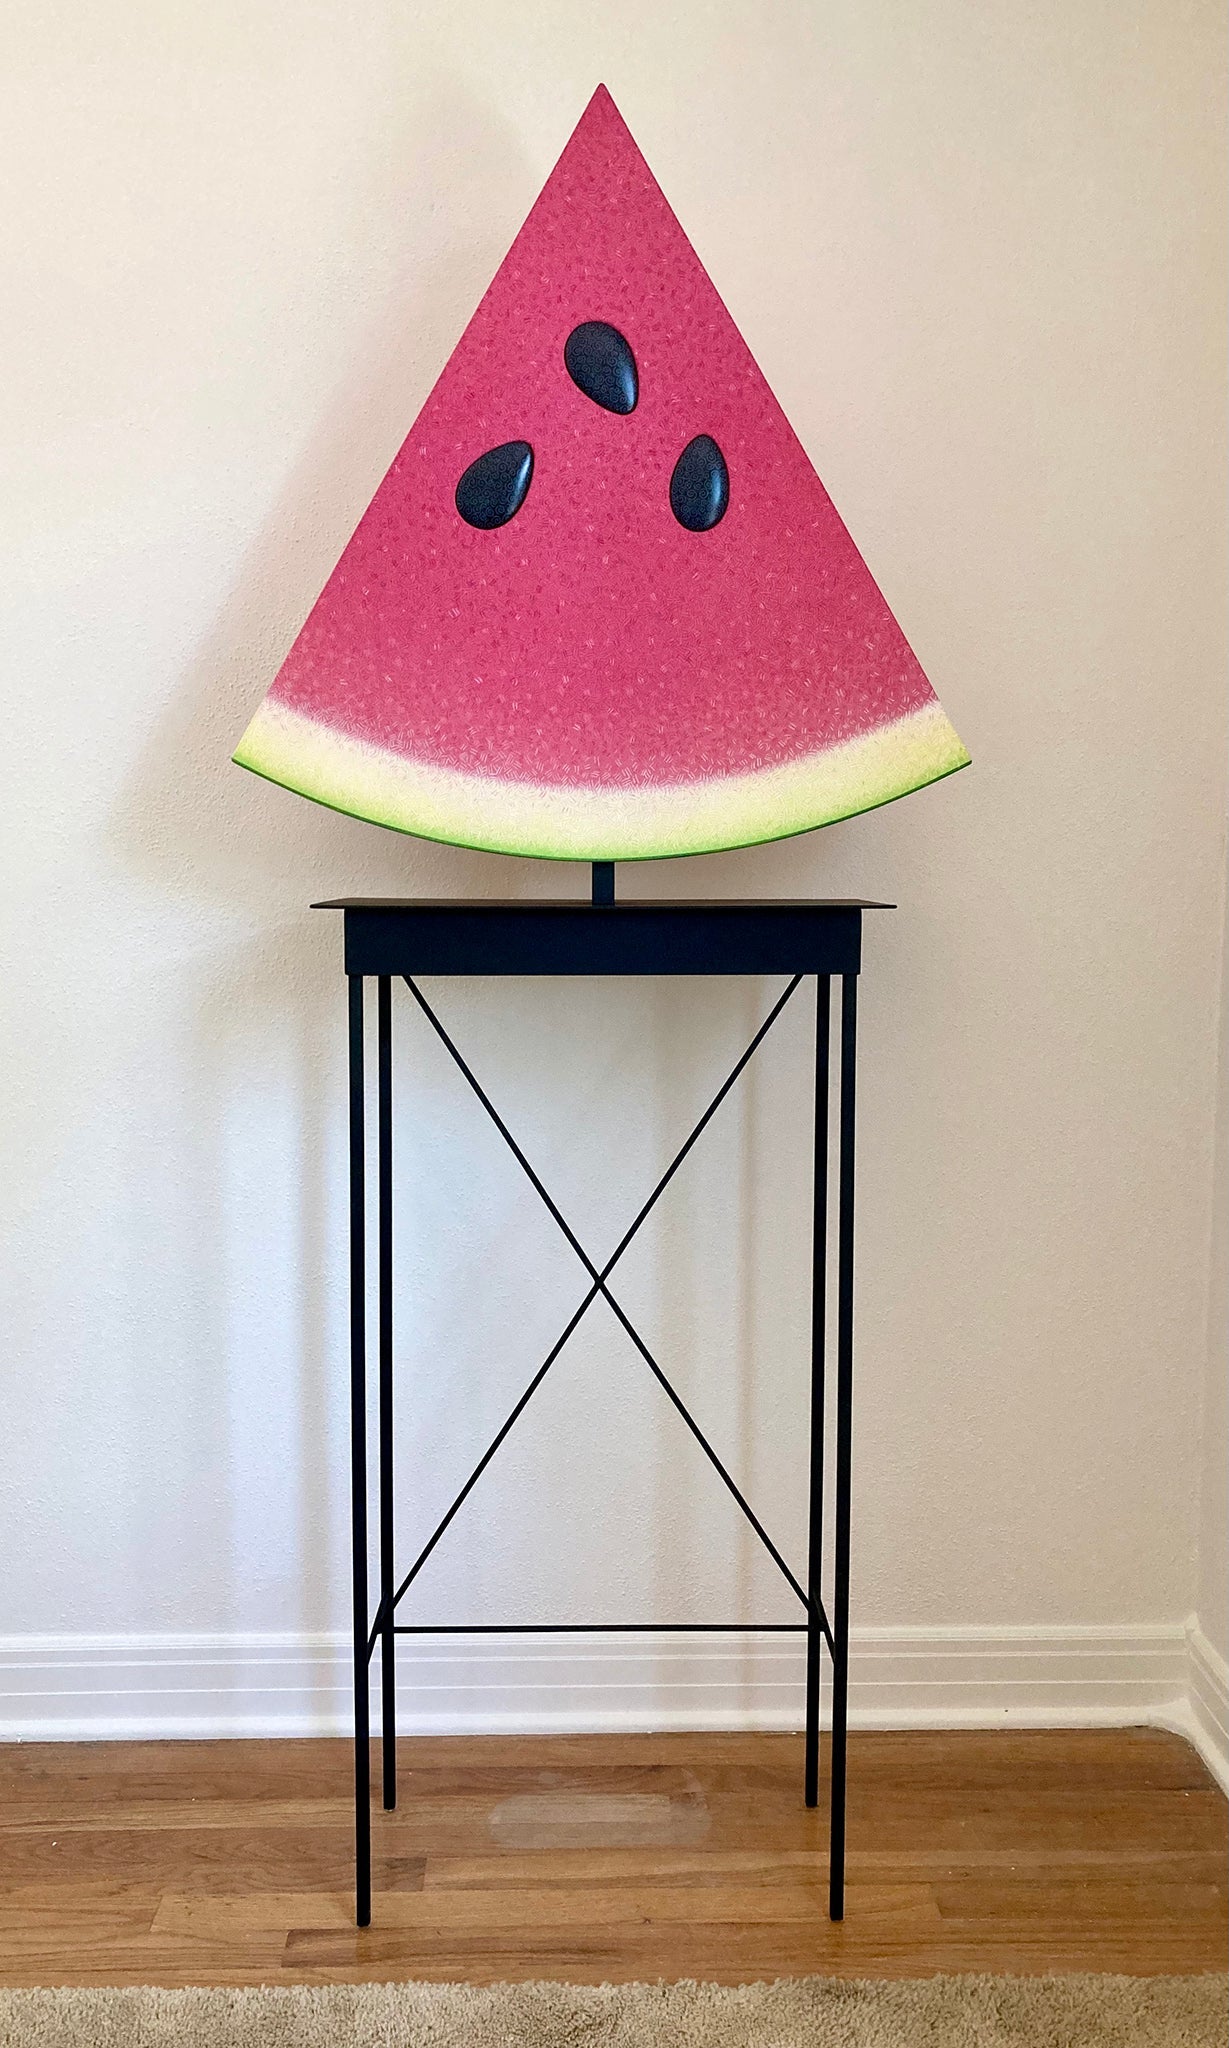 Sculpture depicting a large slice of watermelon atop a black table. 2022 70"x28"x10" painted wood, steel table by Sean O'Meallie